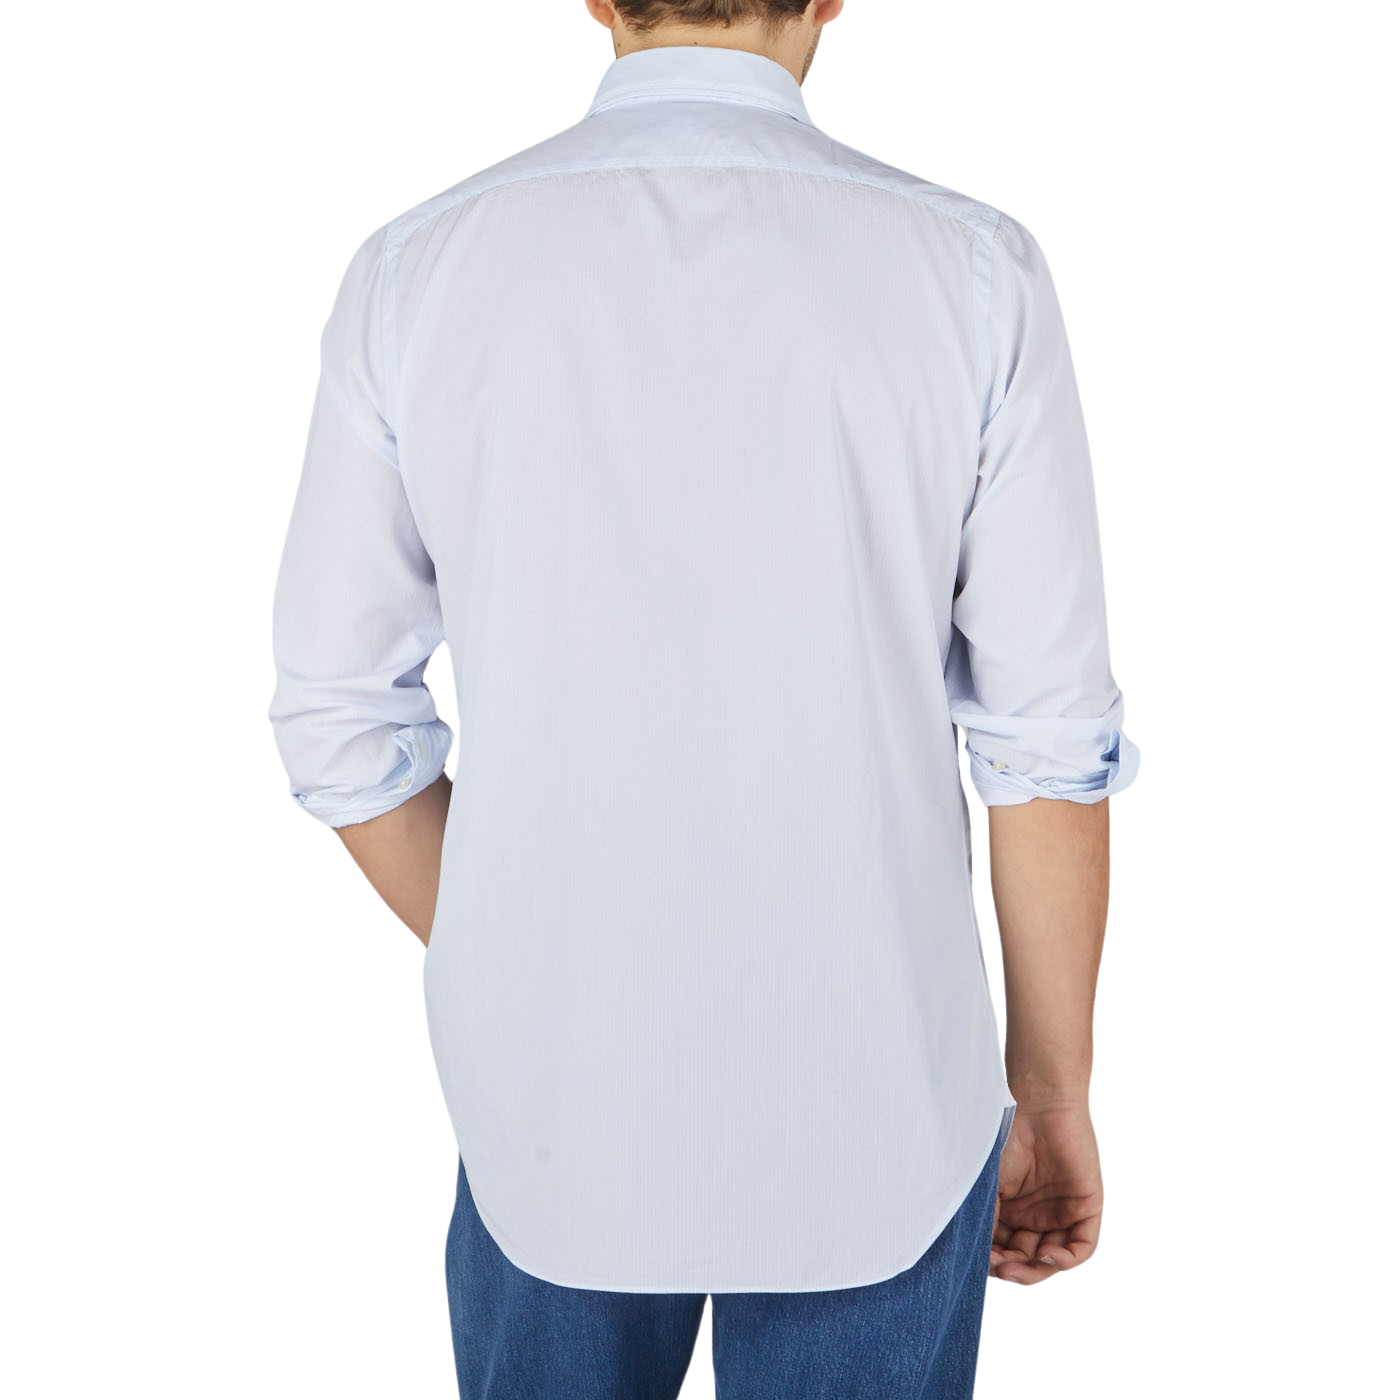 The back view of a man wearing a Finamore Washed Light Blue Striped Cotton Shirt from Naples.